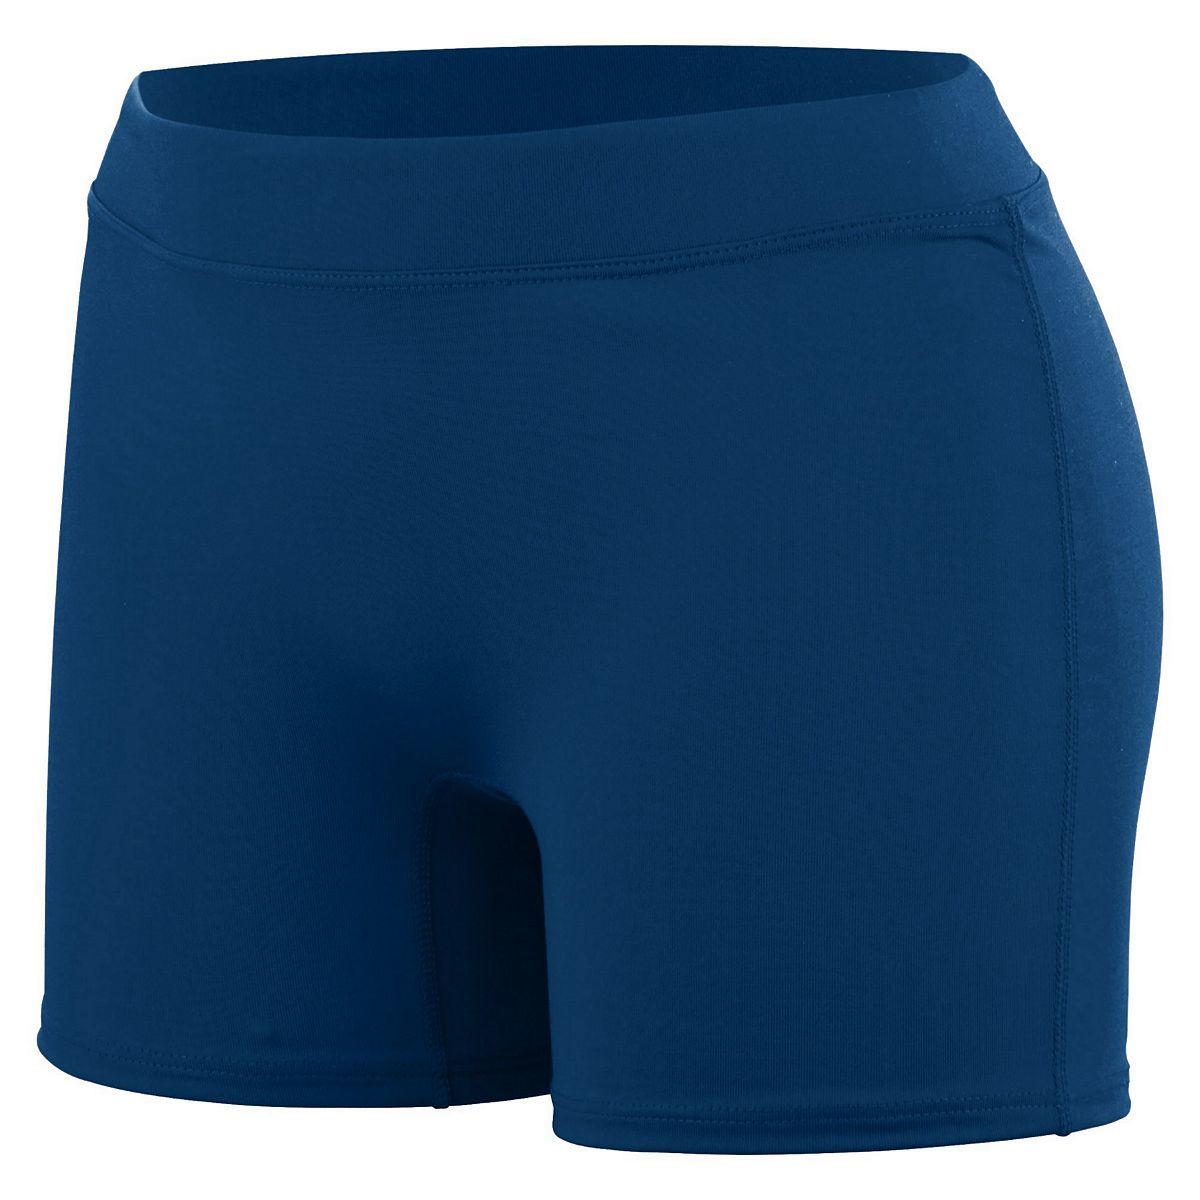 High 5 Ladies Knock Out Shorts in Navy  -Part of the Ladies, Ladies-Shorts, High5-Products, Volleyball product lines at KanaleyCreations.com